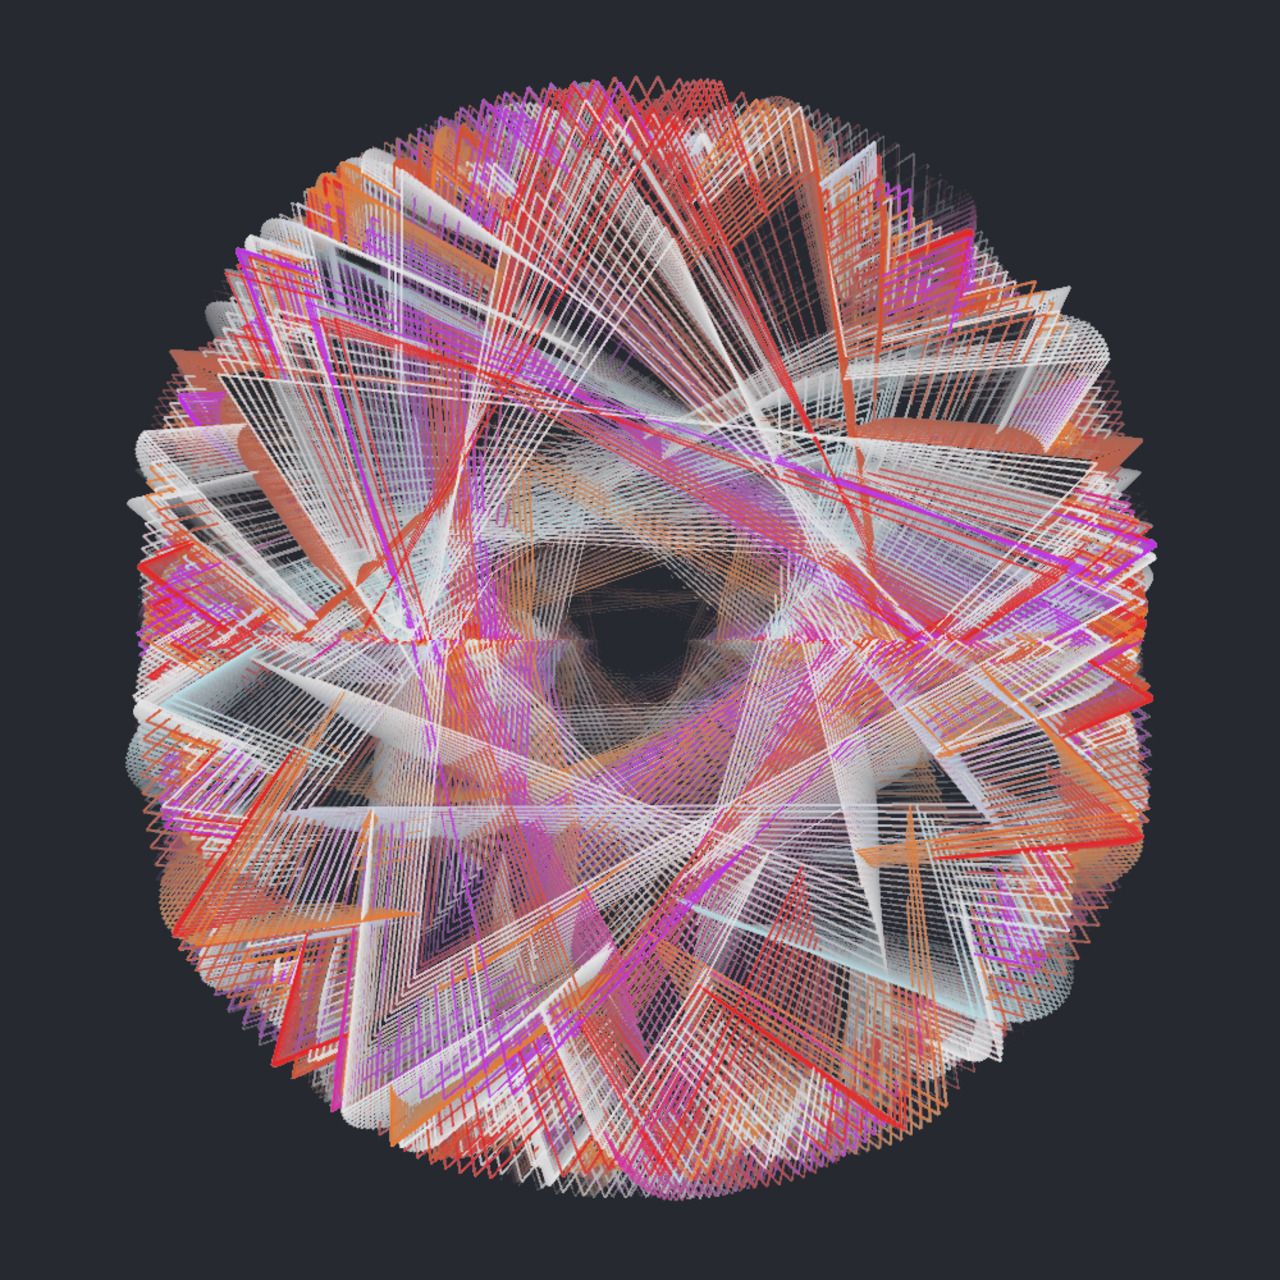 148/365 "Concentric" Animated Version: http://tmblr.co/ZN9fUo1Lv1Pqu #CreateEveryDay #processing #generative #art http://t.co/g5h5APieoD